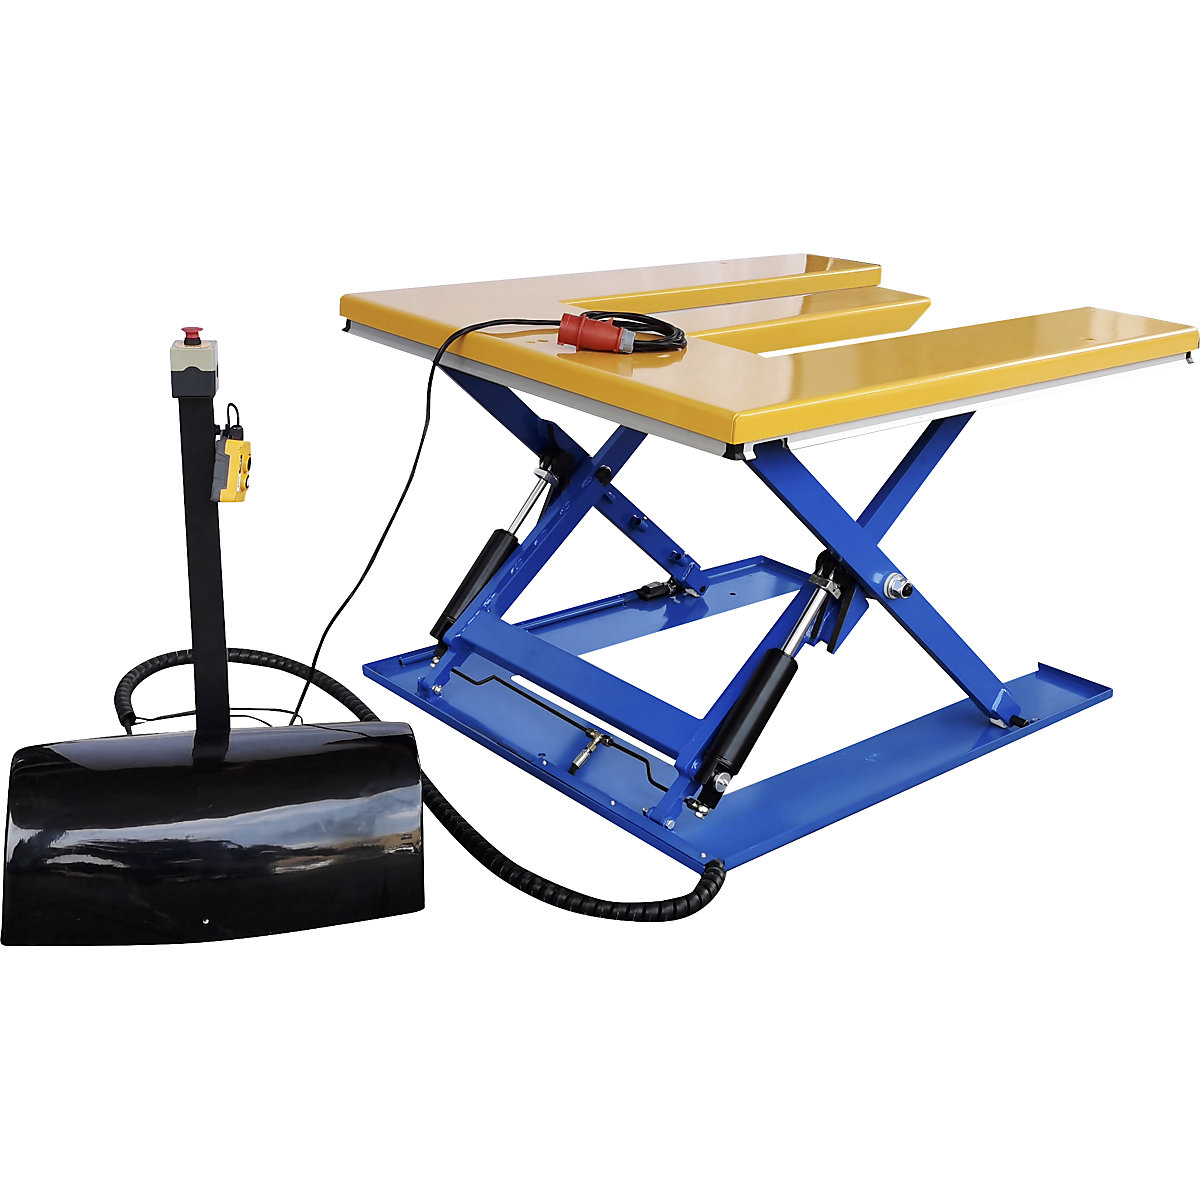 Low profile lift table – eurokraft basic, E shaped, max. load 1200 kg, hand operated control unit